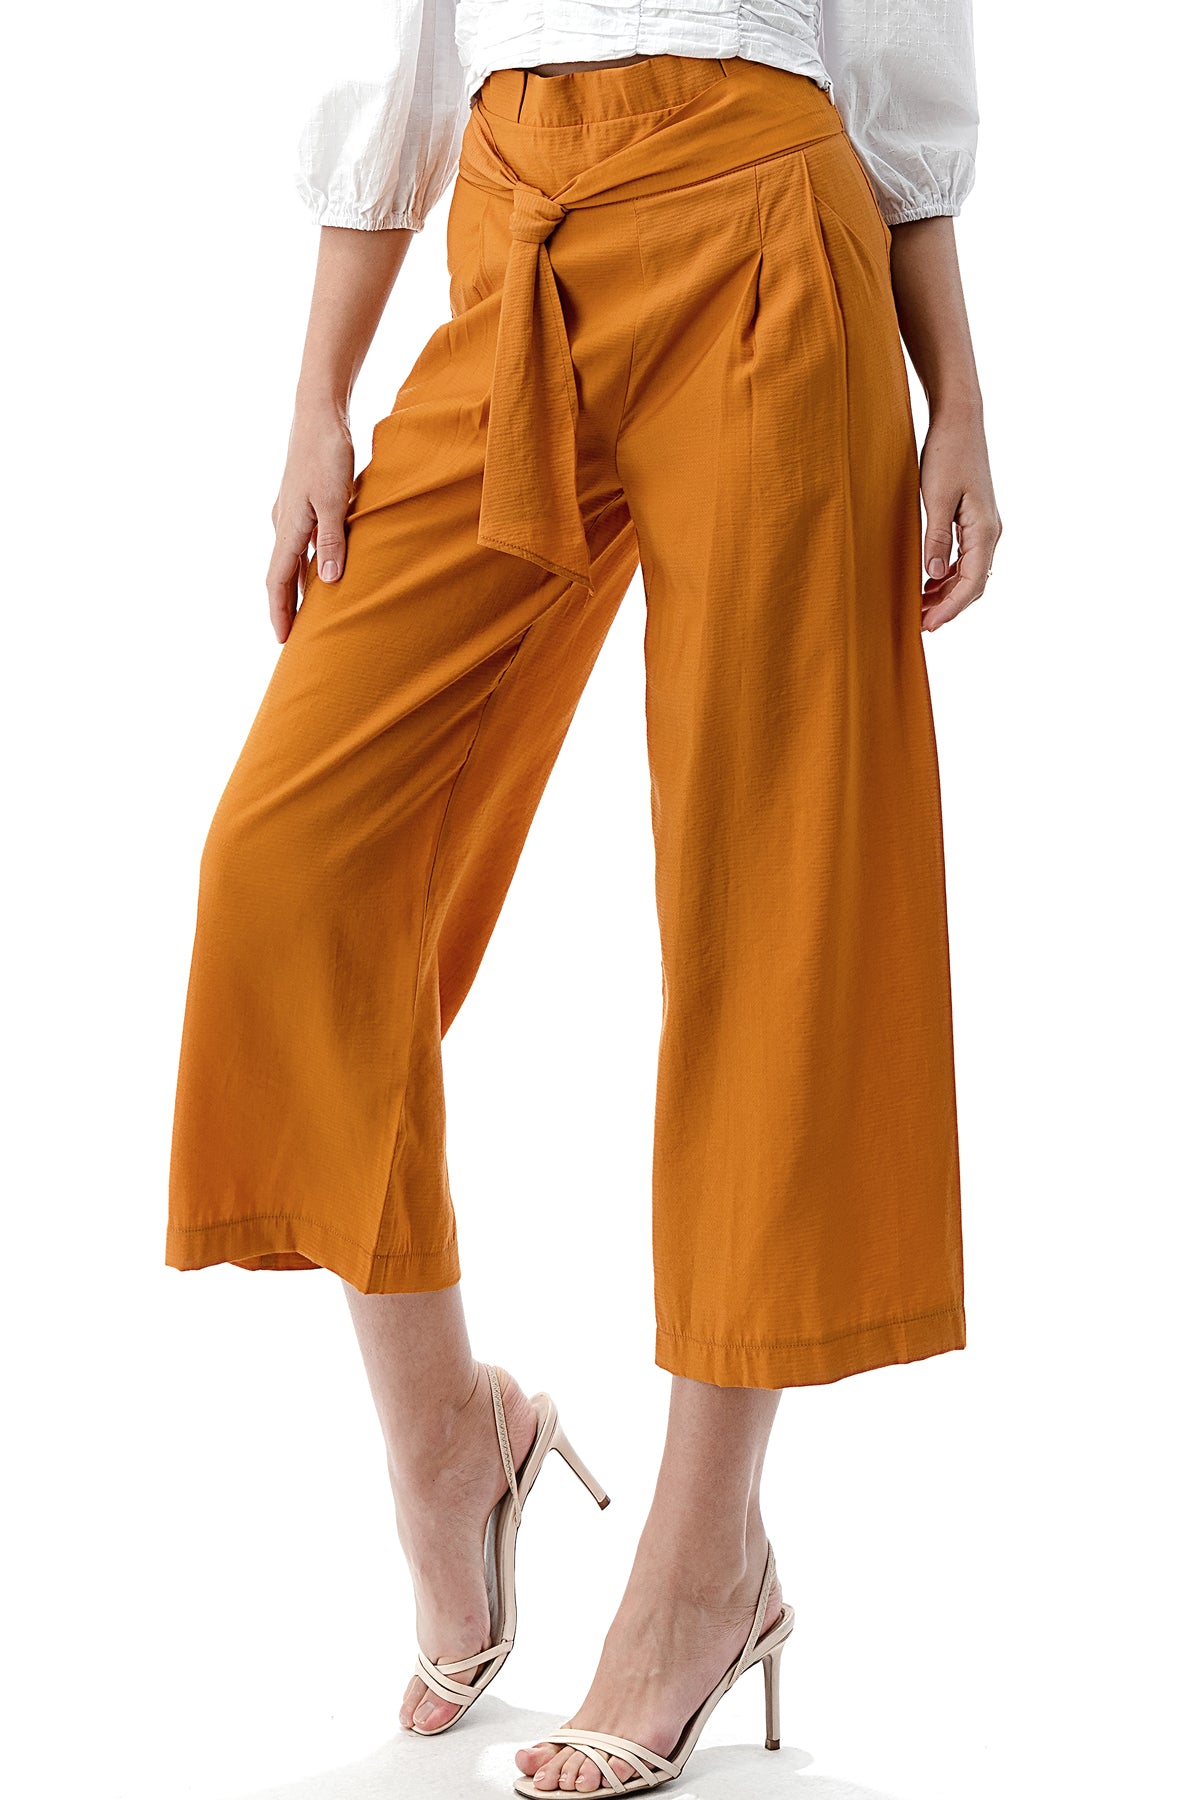 EDGY Land Girl's and Women's Pleat Waist Self Tie Belt Slit Pocket CroPPEd Pants